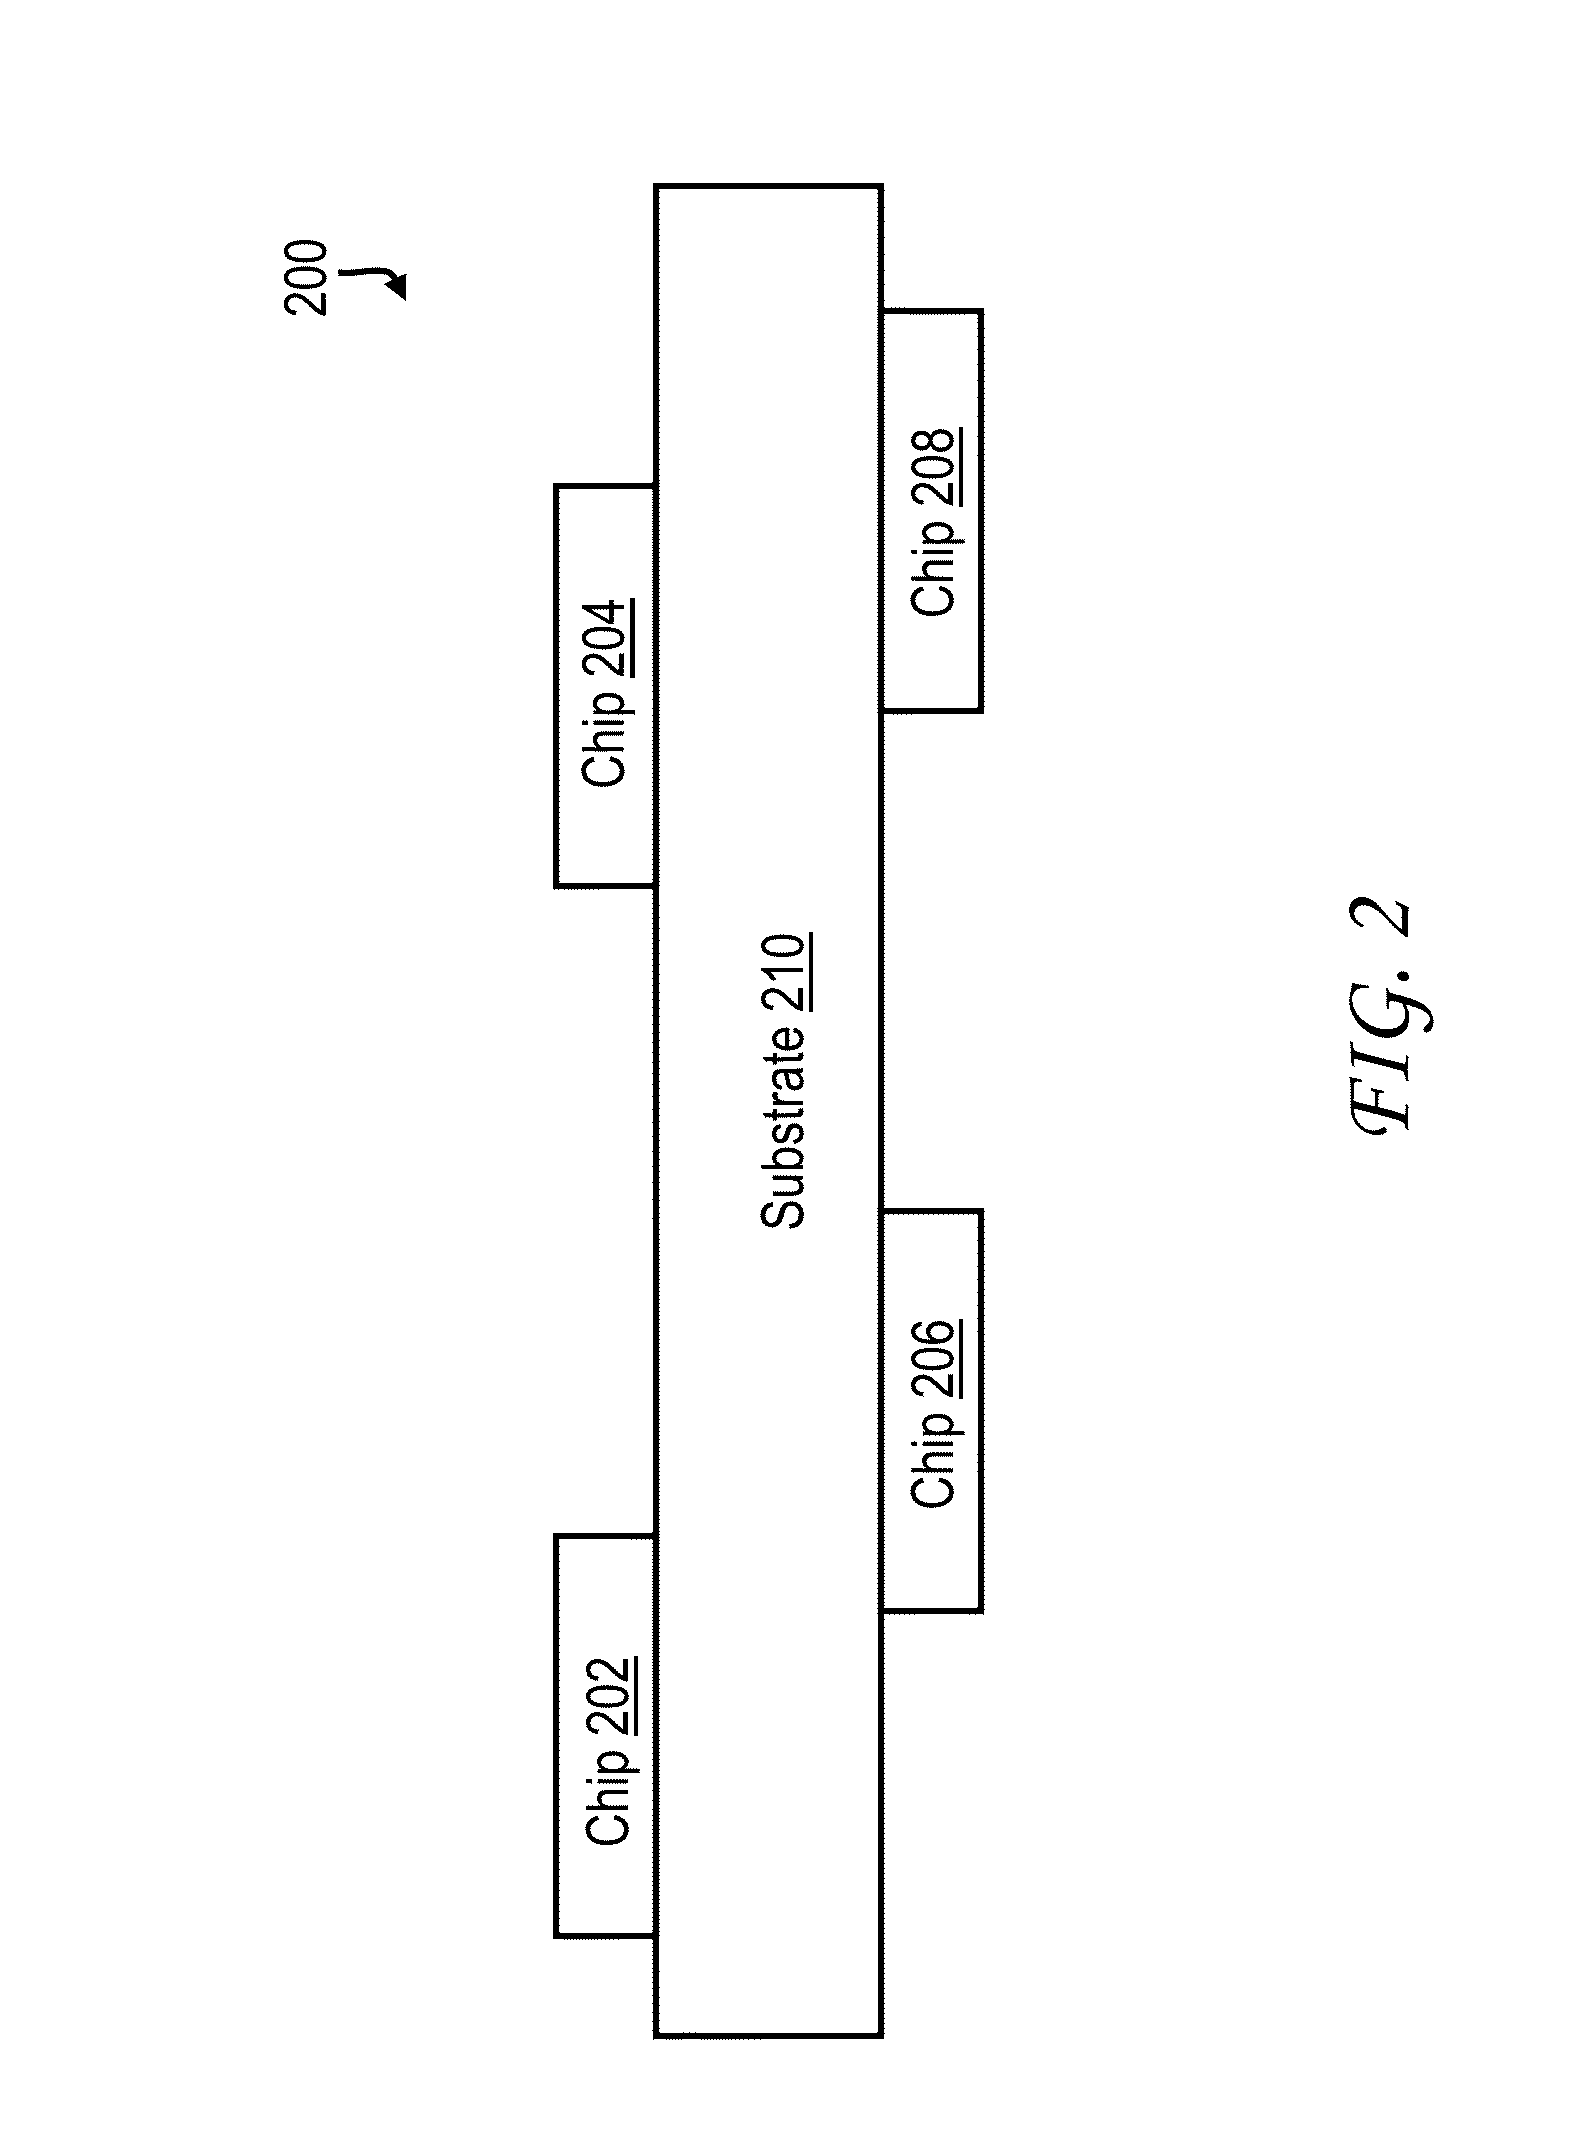 Cost-function based routing techniques for reducing crosstalk in electronic package designs